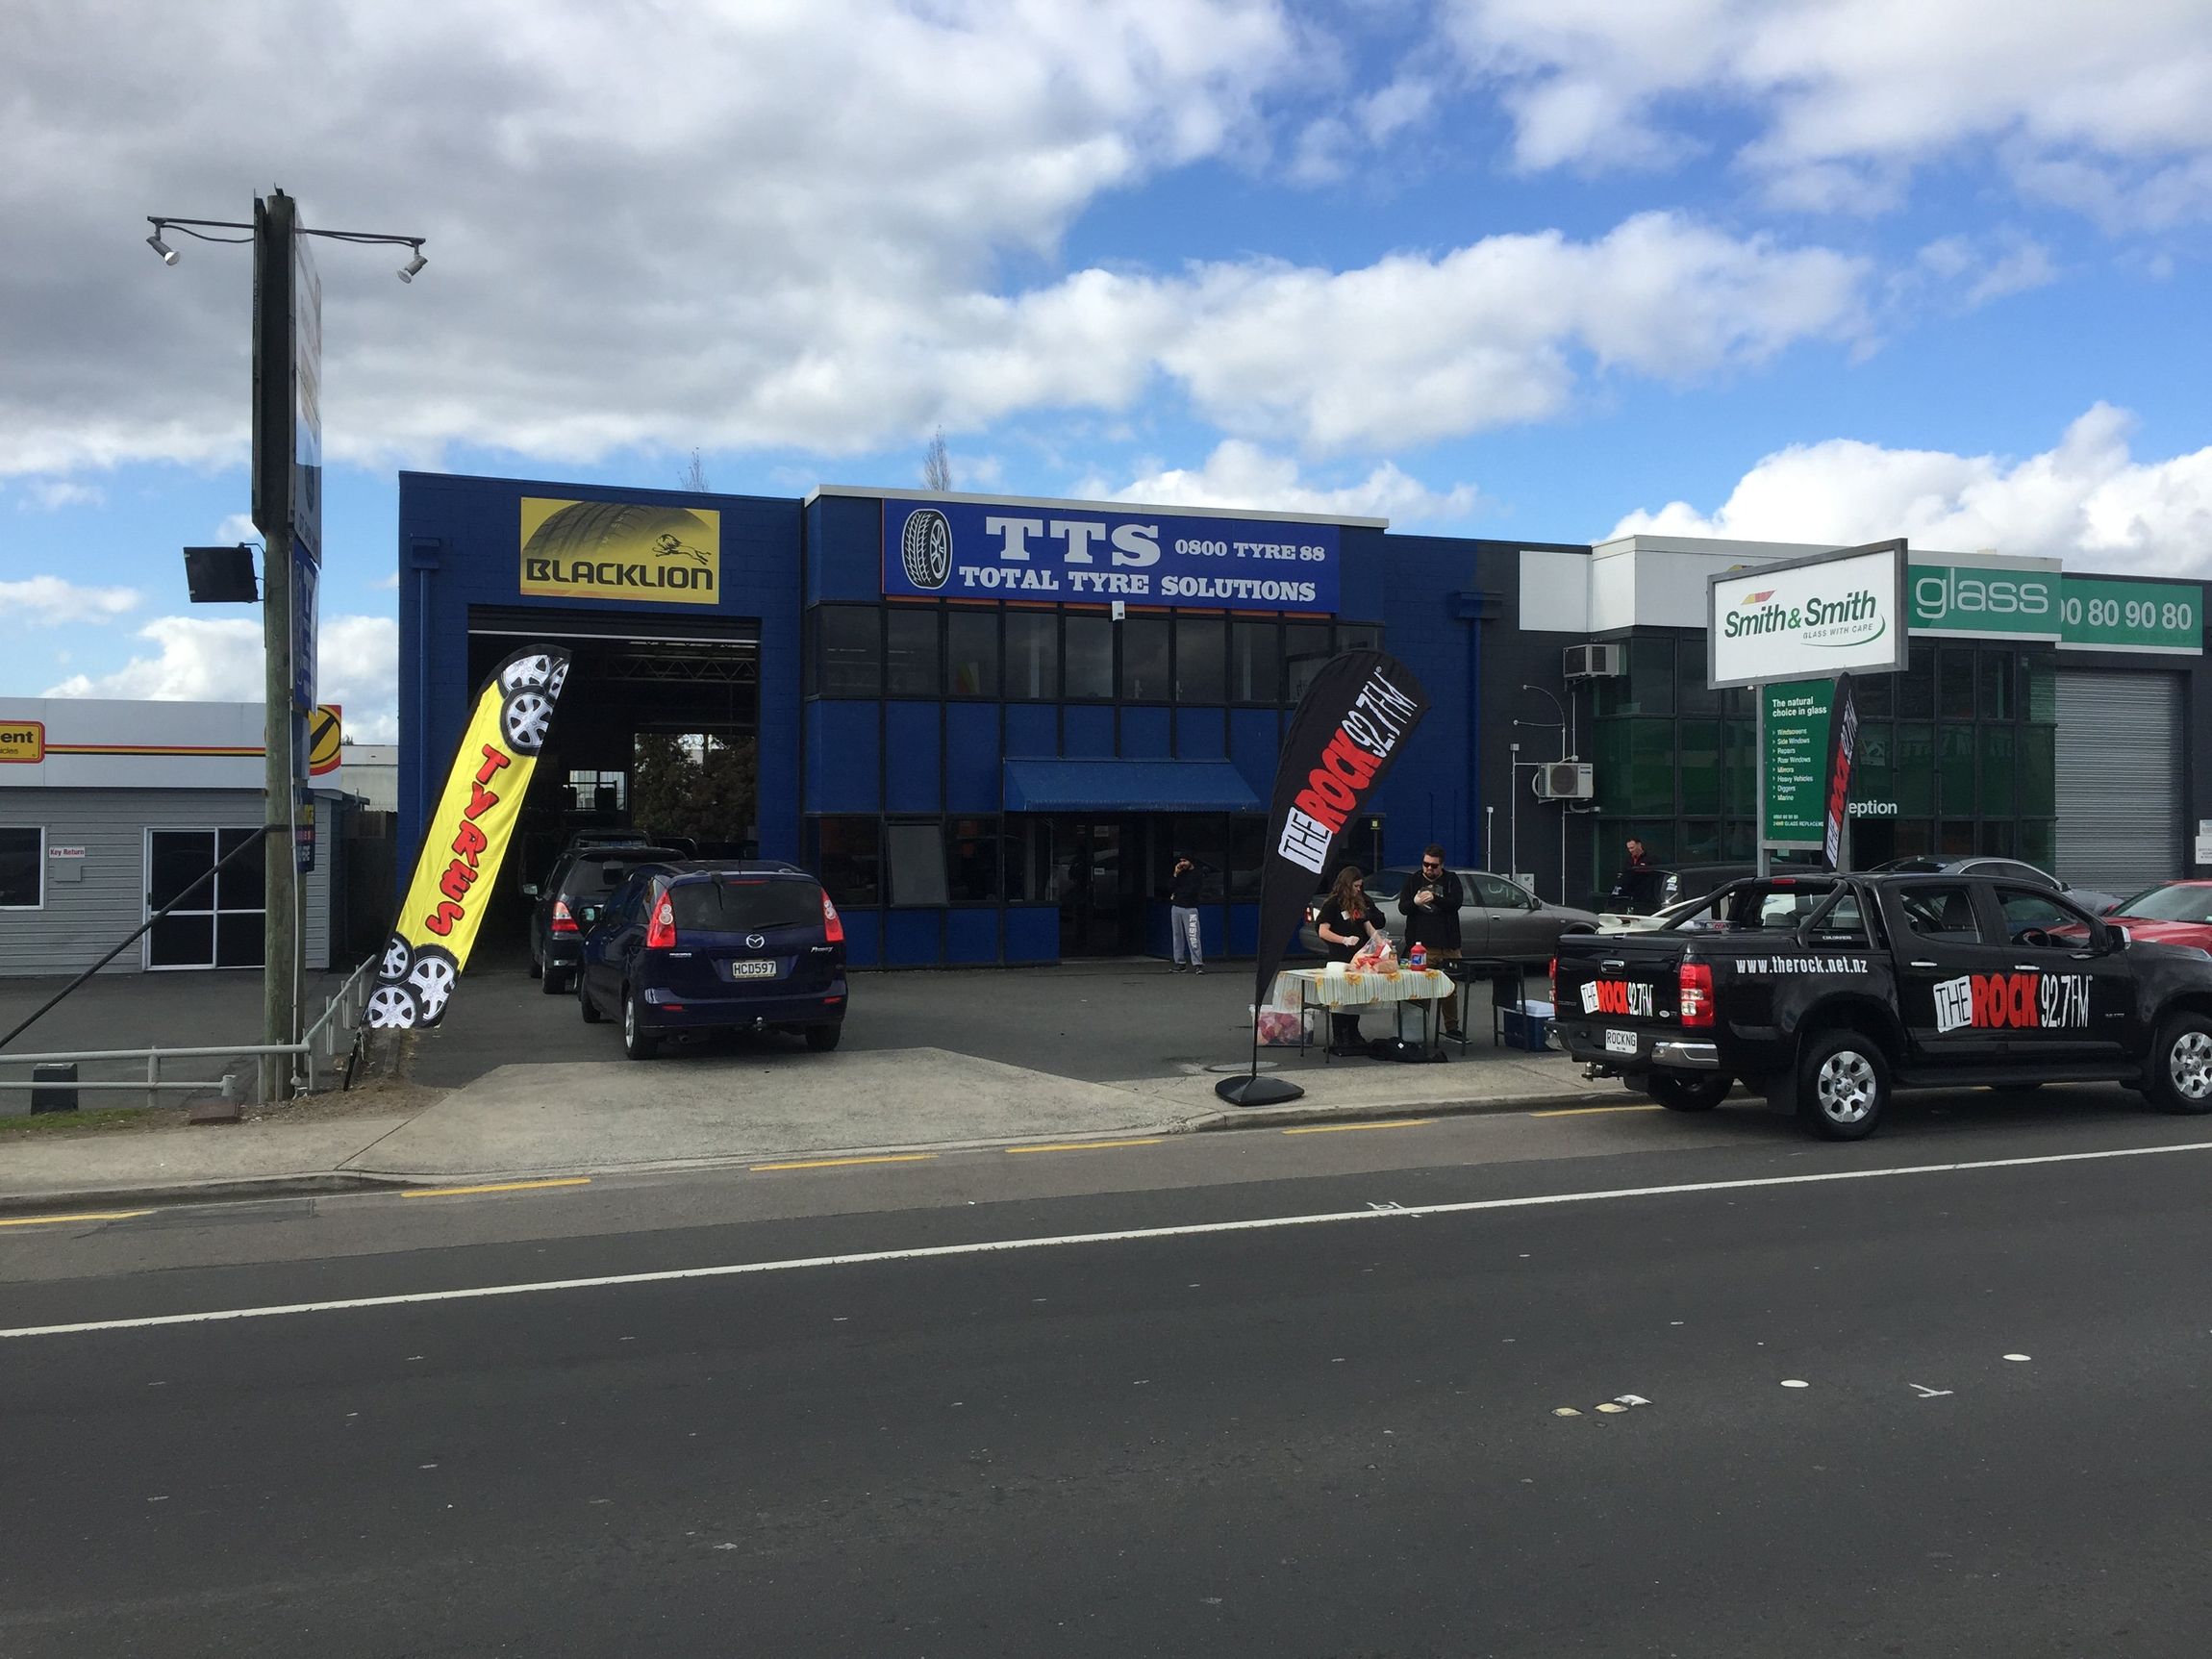 Tyres and wheels experts providing solutions for cars in Rotorua